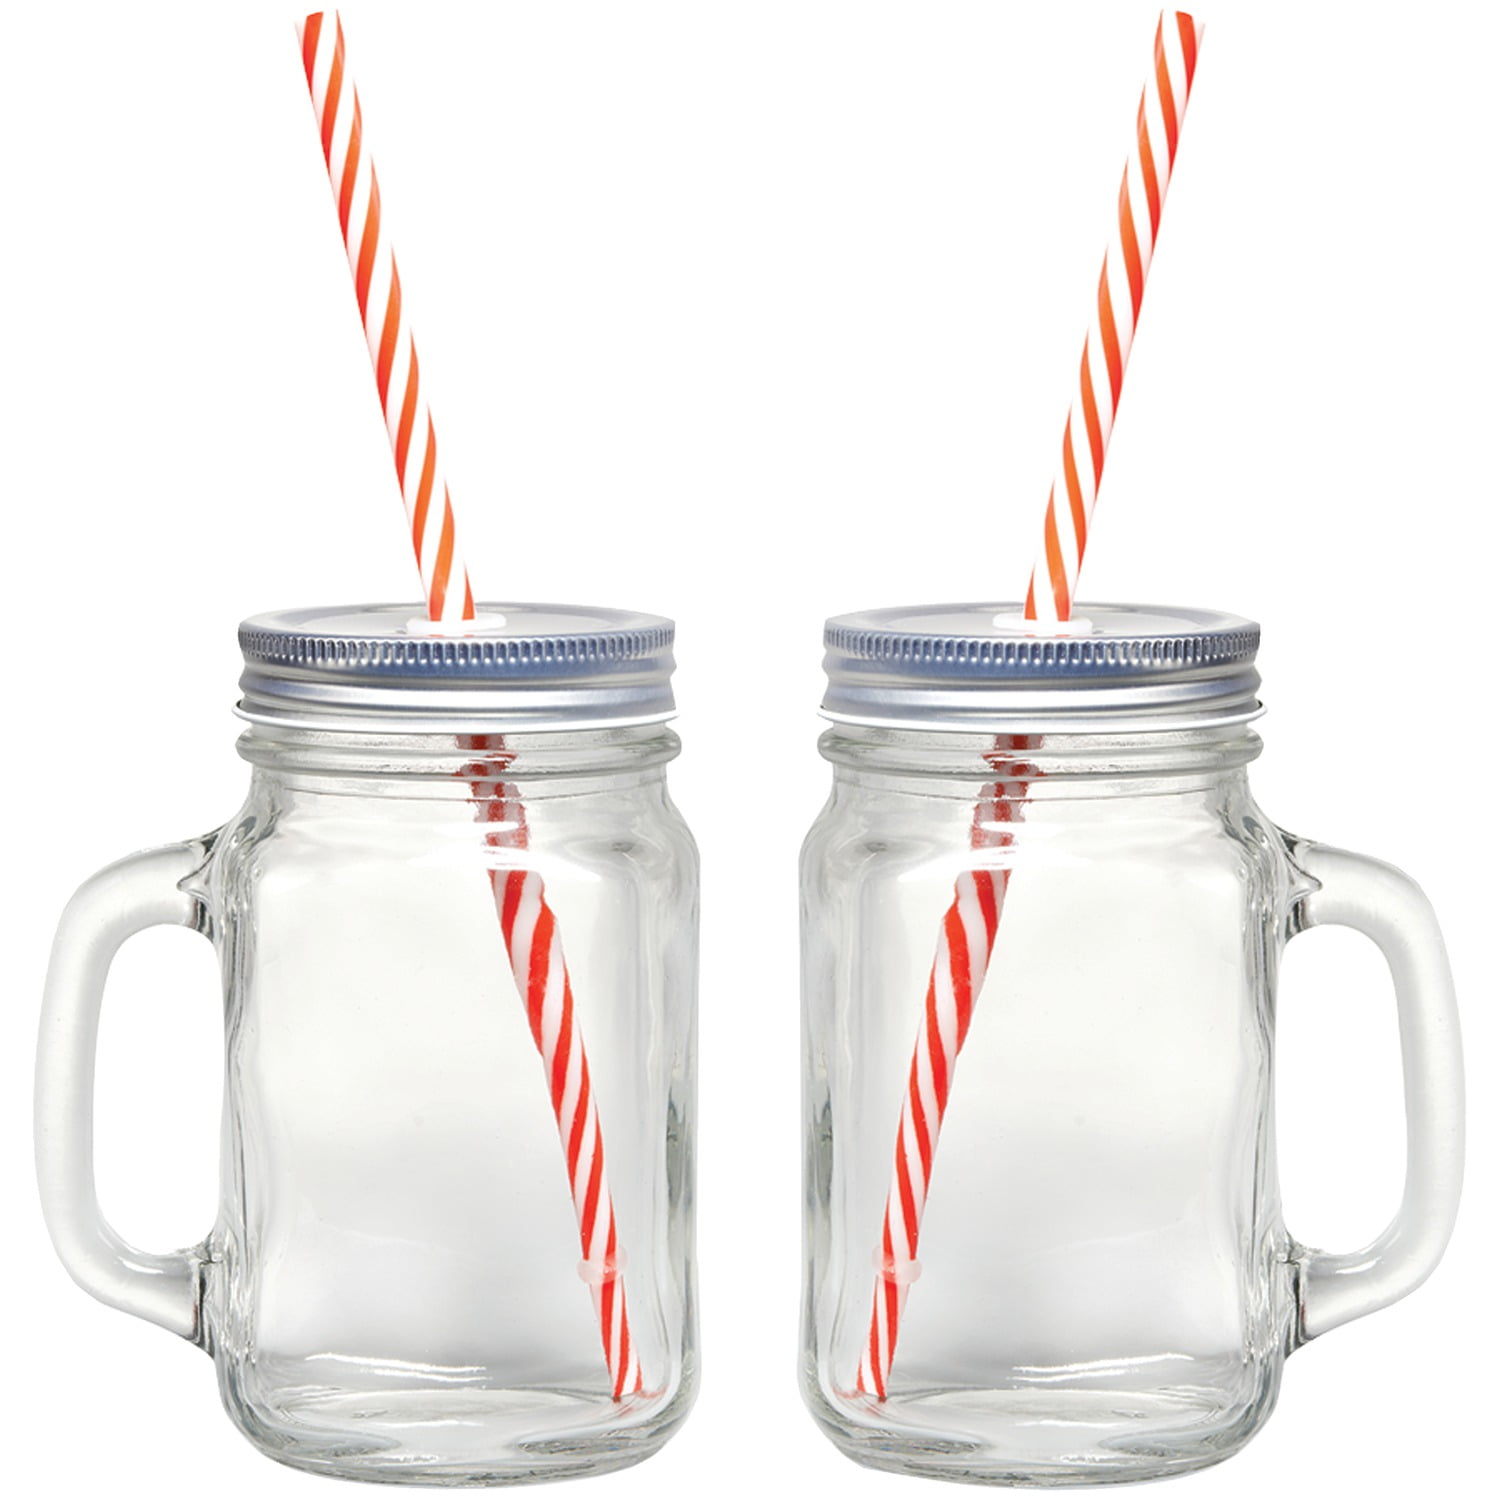 Brimley 16oz Glass Mason Jar with Lid and Straw Set of 4 - Mason Jars with  Handle for Cold Drinks - …See more Brimley 16oz Glass Mason Jar with Lid